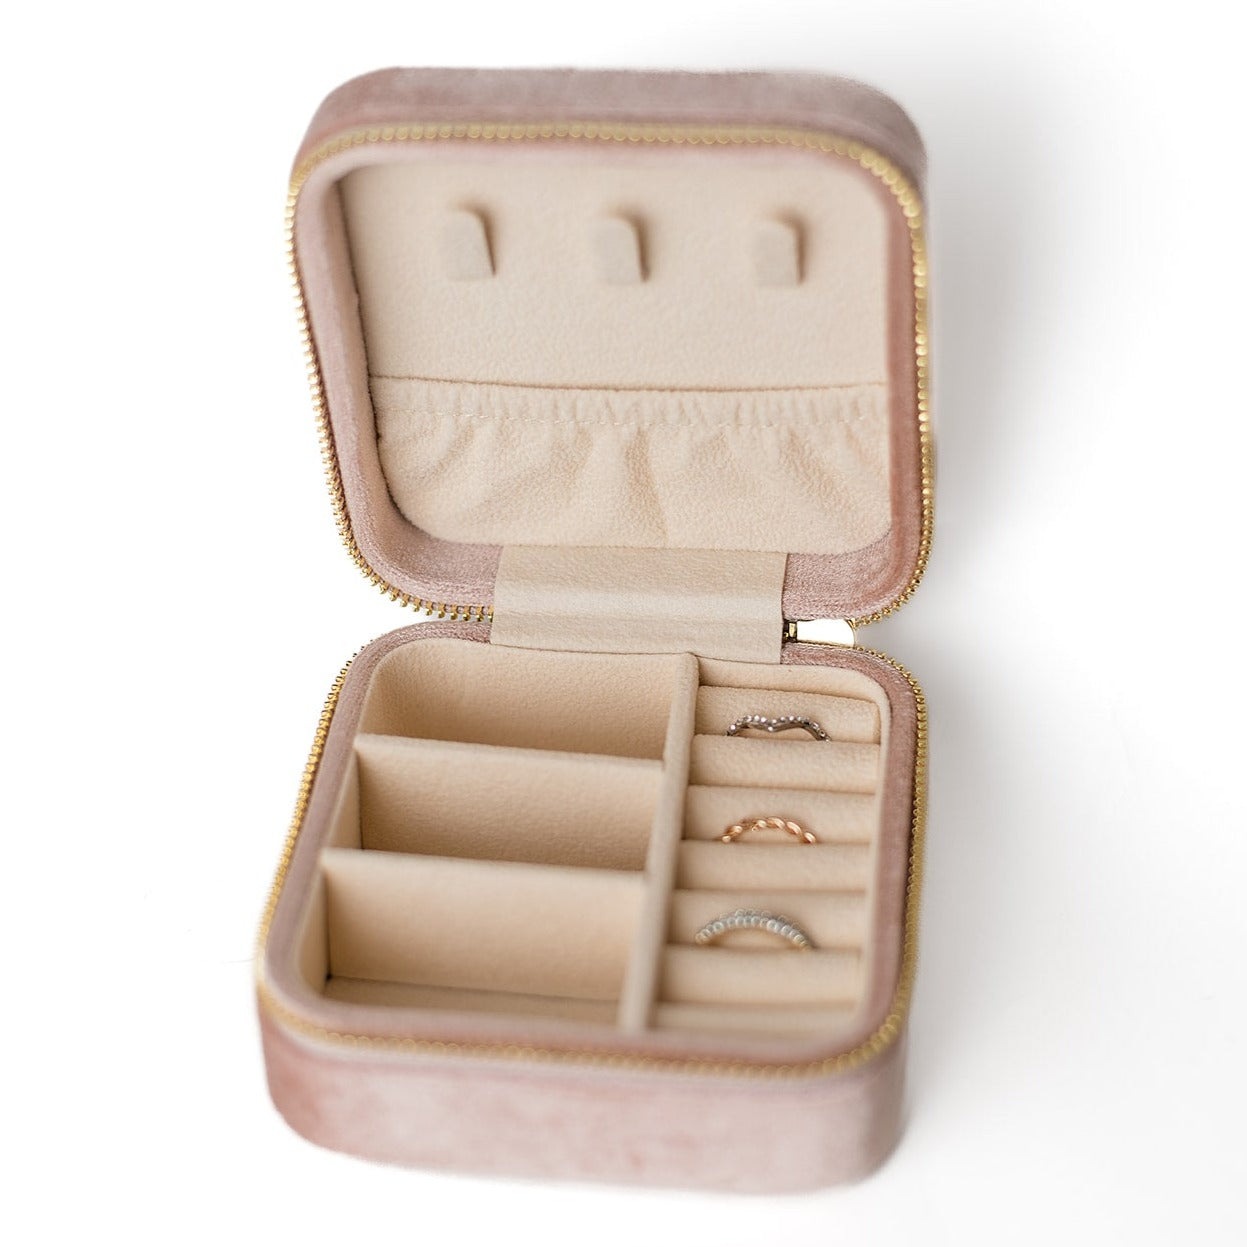 The inside of a blush-coloured jewelry case. There are three storage sections and seven ring slots on the bottom portion of the case. On the top half, there are three hooks for chains or necklaces and well as a pouch to tuck them in.